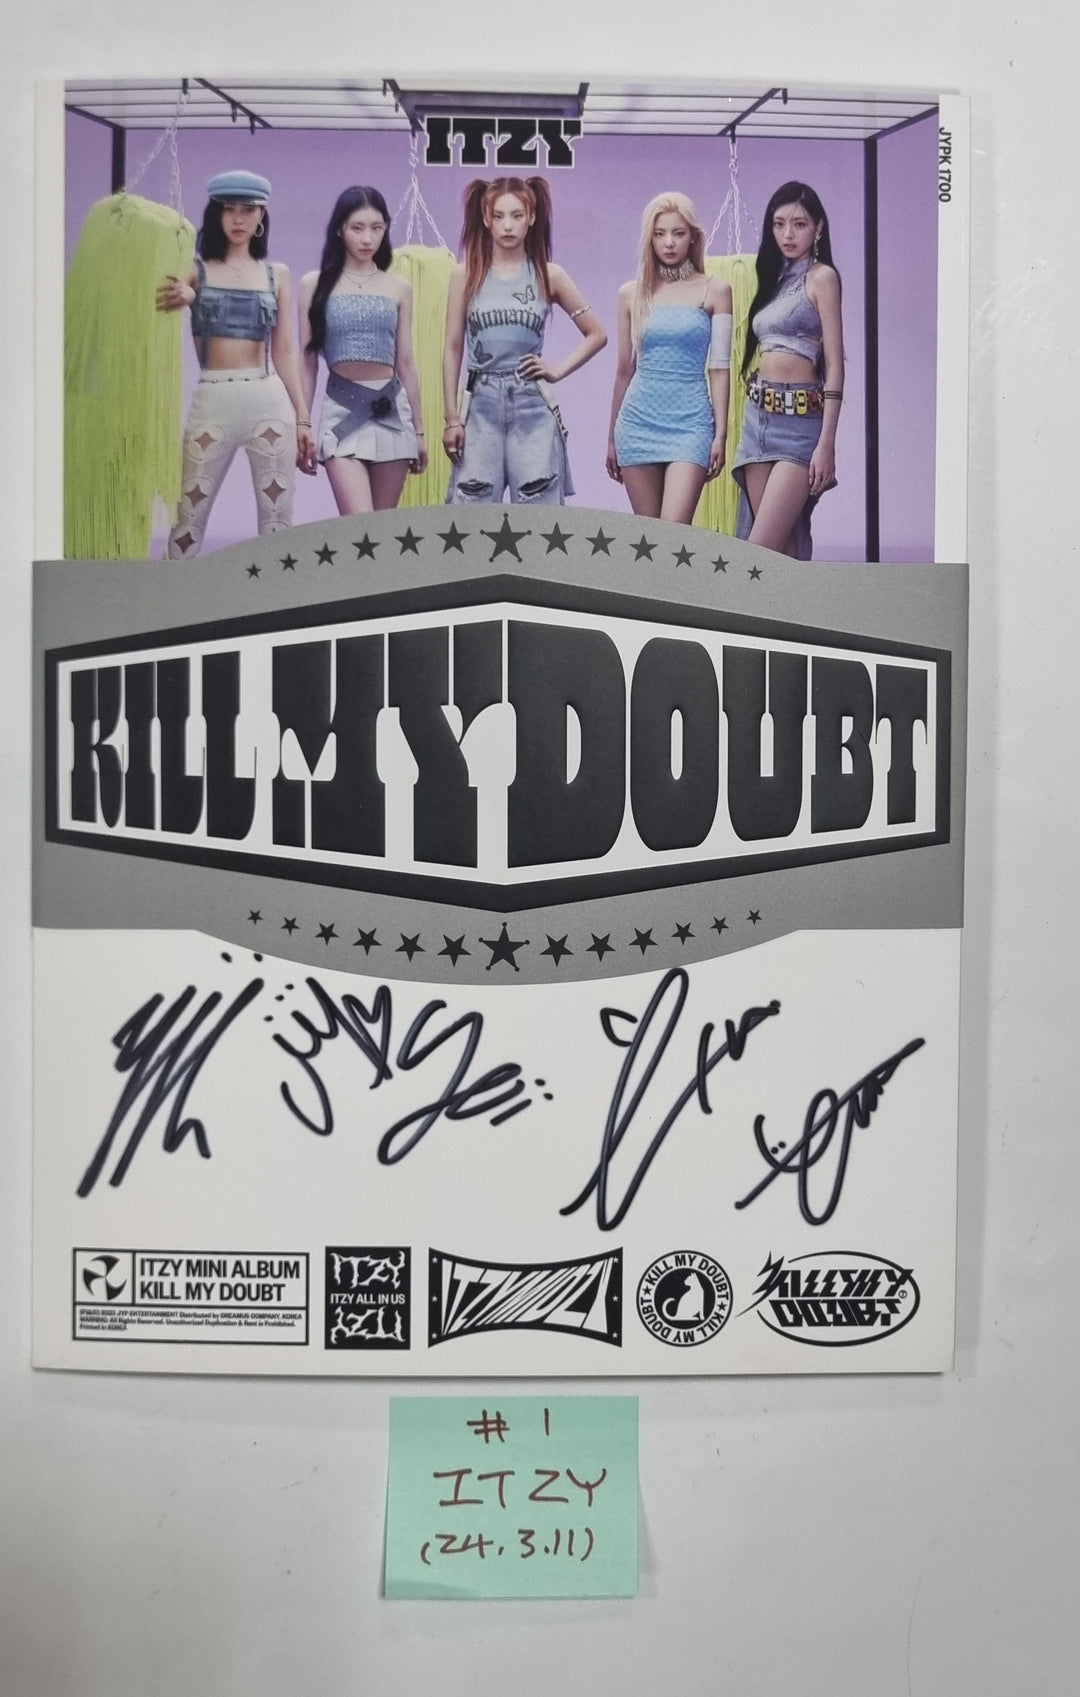 Itzy "Kill My Doubt" - Hand Autographed(Signed) Promo Album [24.3.11]